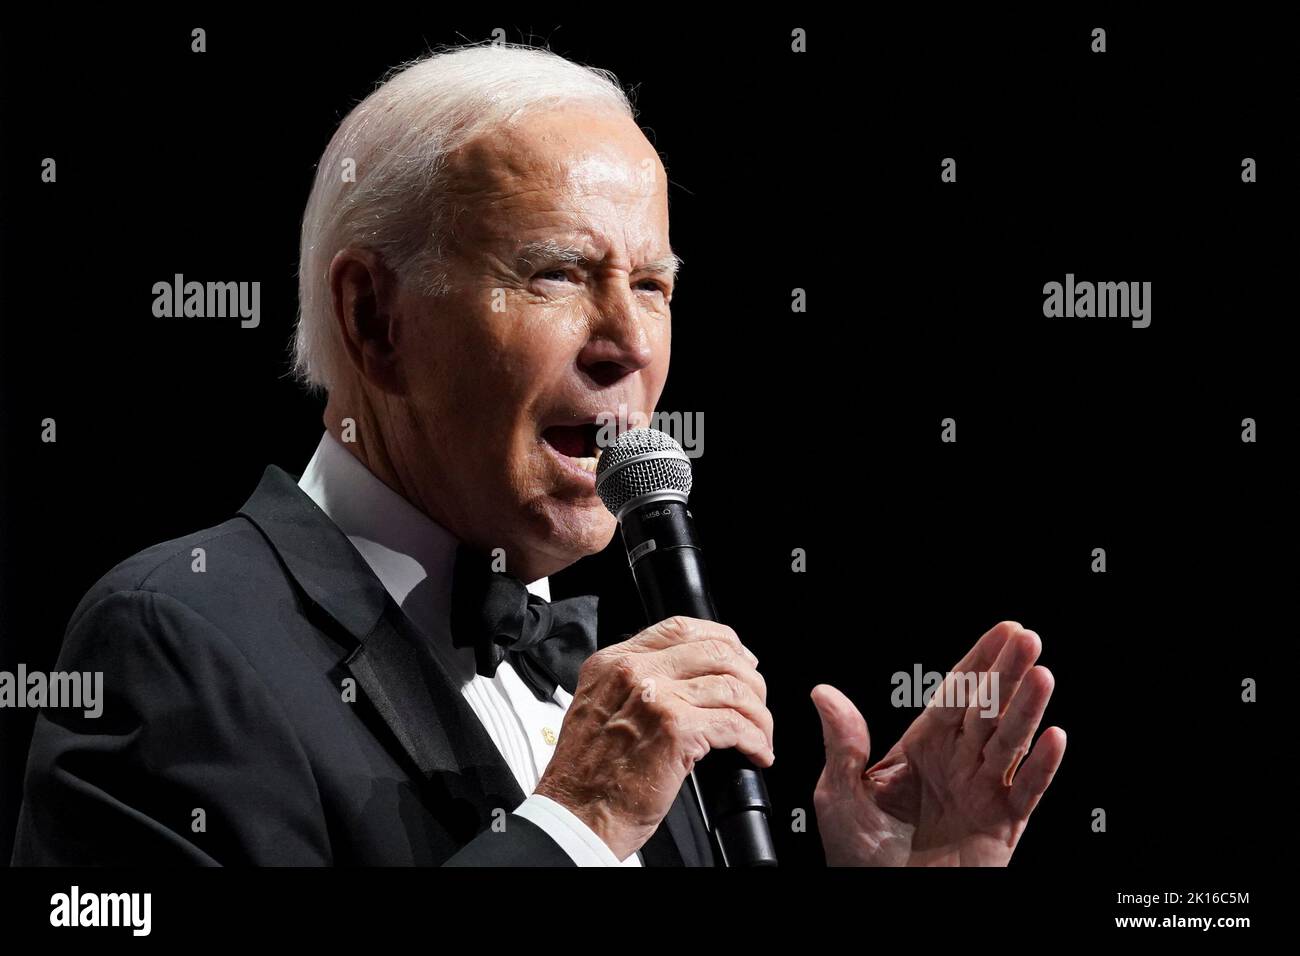 U.S. President Joe Biden speaks as he attends the 45th Congressional Hispanic Caucus Institute Gala to kick-off the White House's celebration of Hispanic Heritage Month, in Washington, U.S. September 15, 2022. REUTERS/Kevin Lamarque Stock Photo